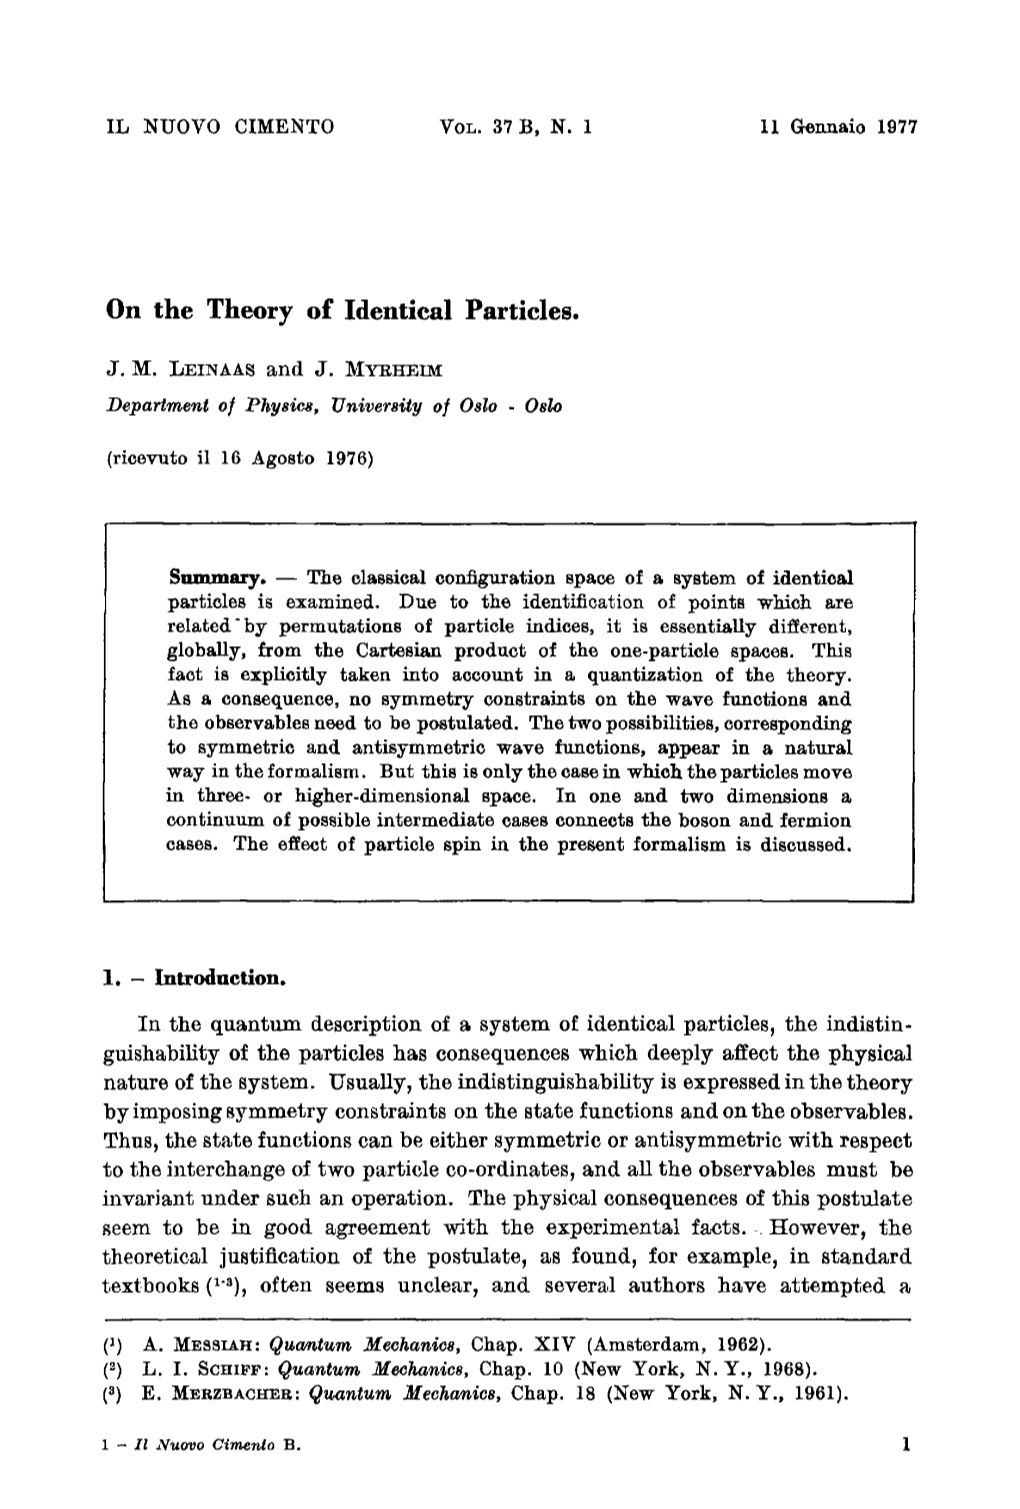 On the Theory of Identical Particles